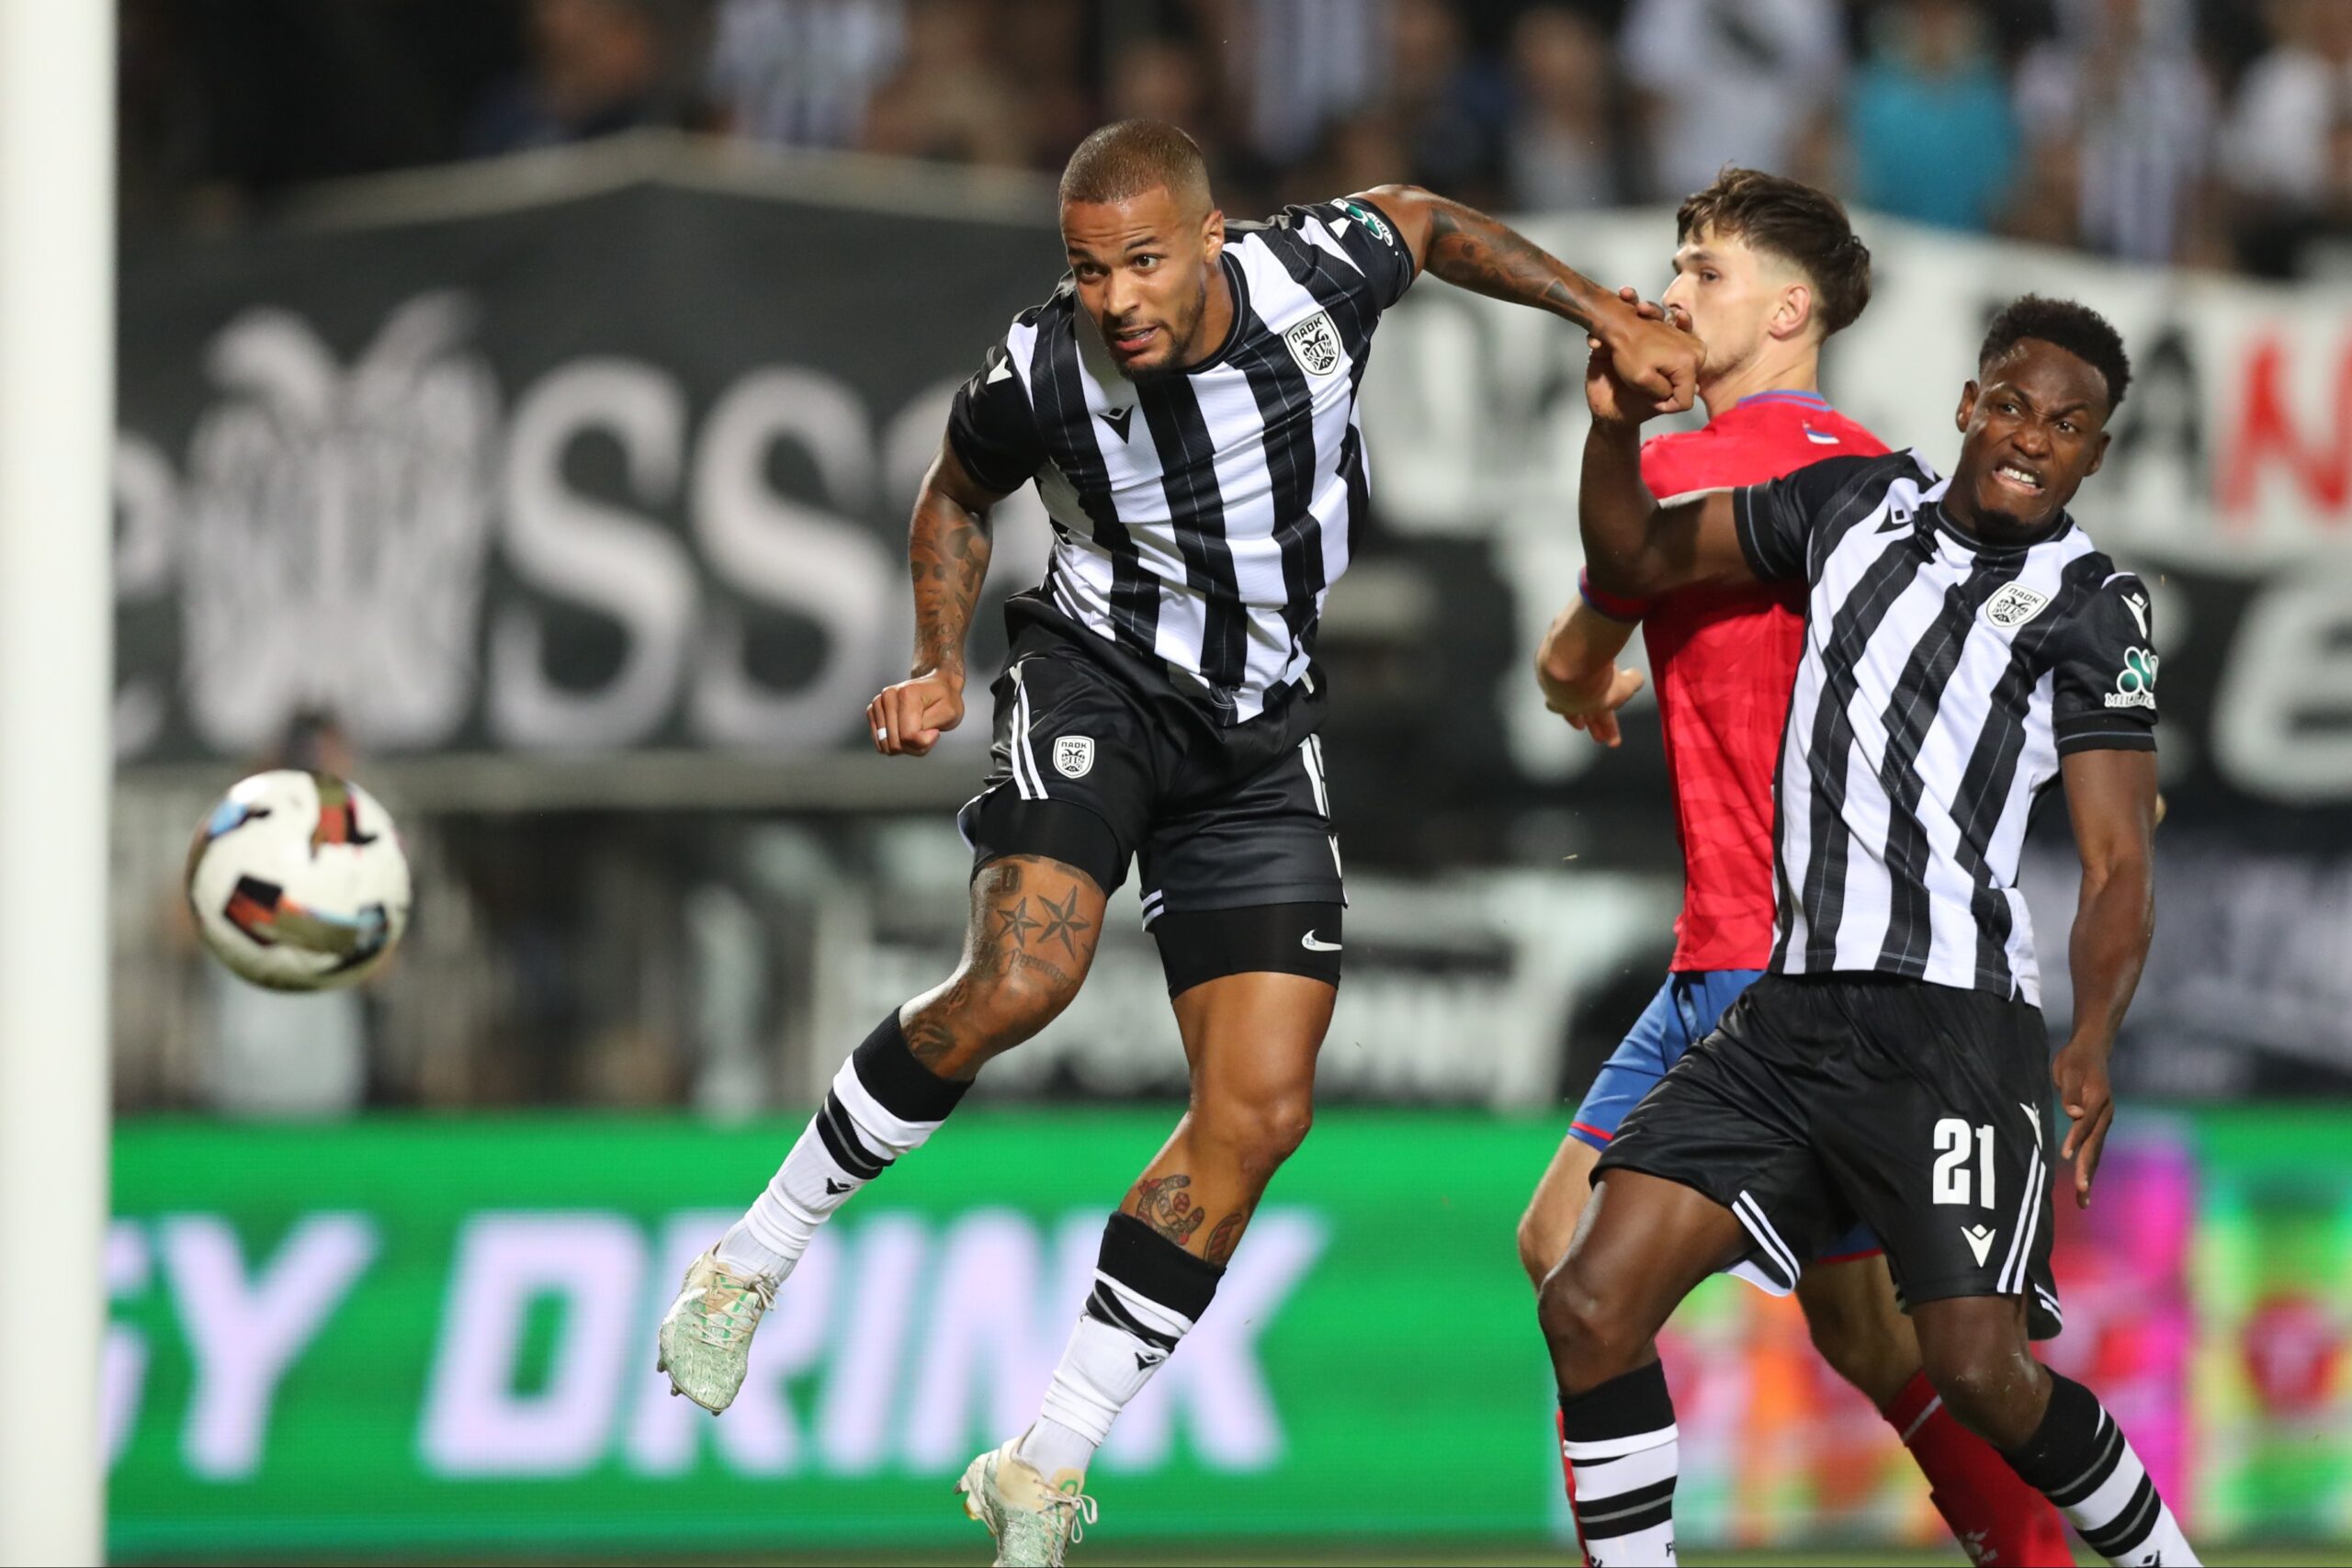 Troost-Ekong Makes Statement Return; Scores Winning Goal for PAOK